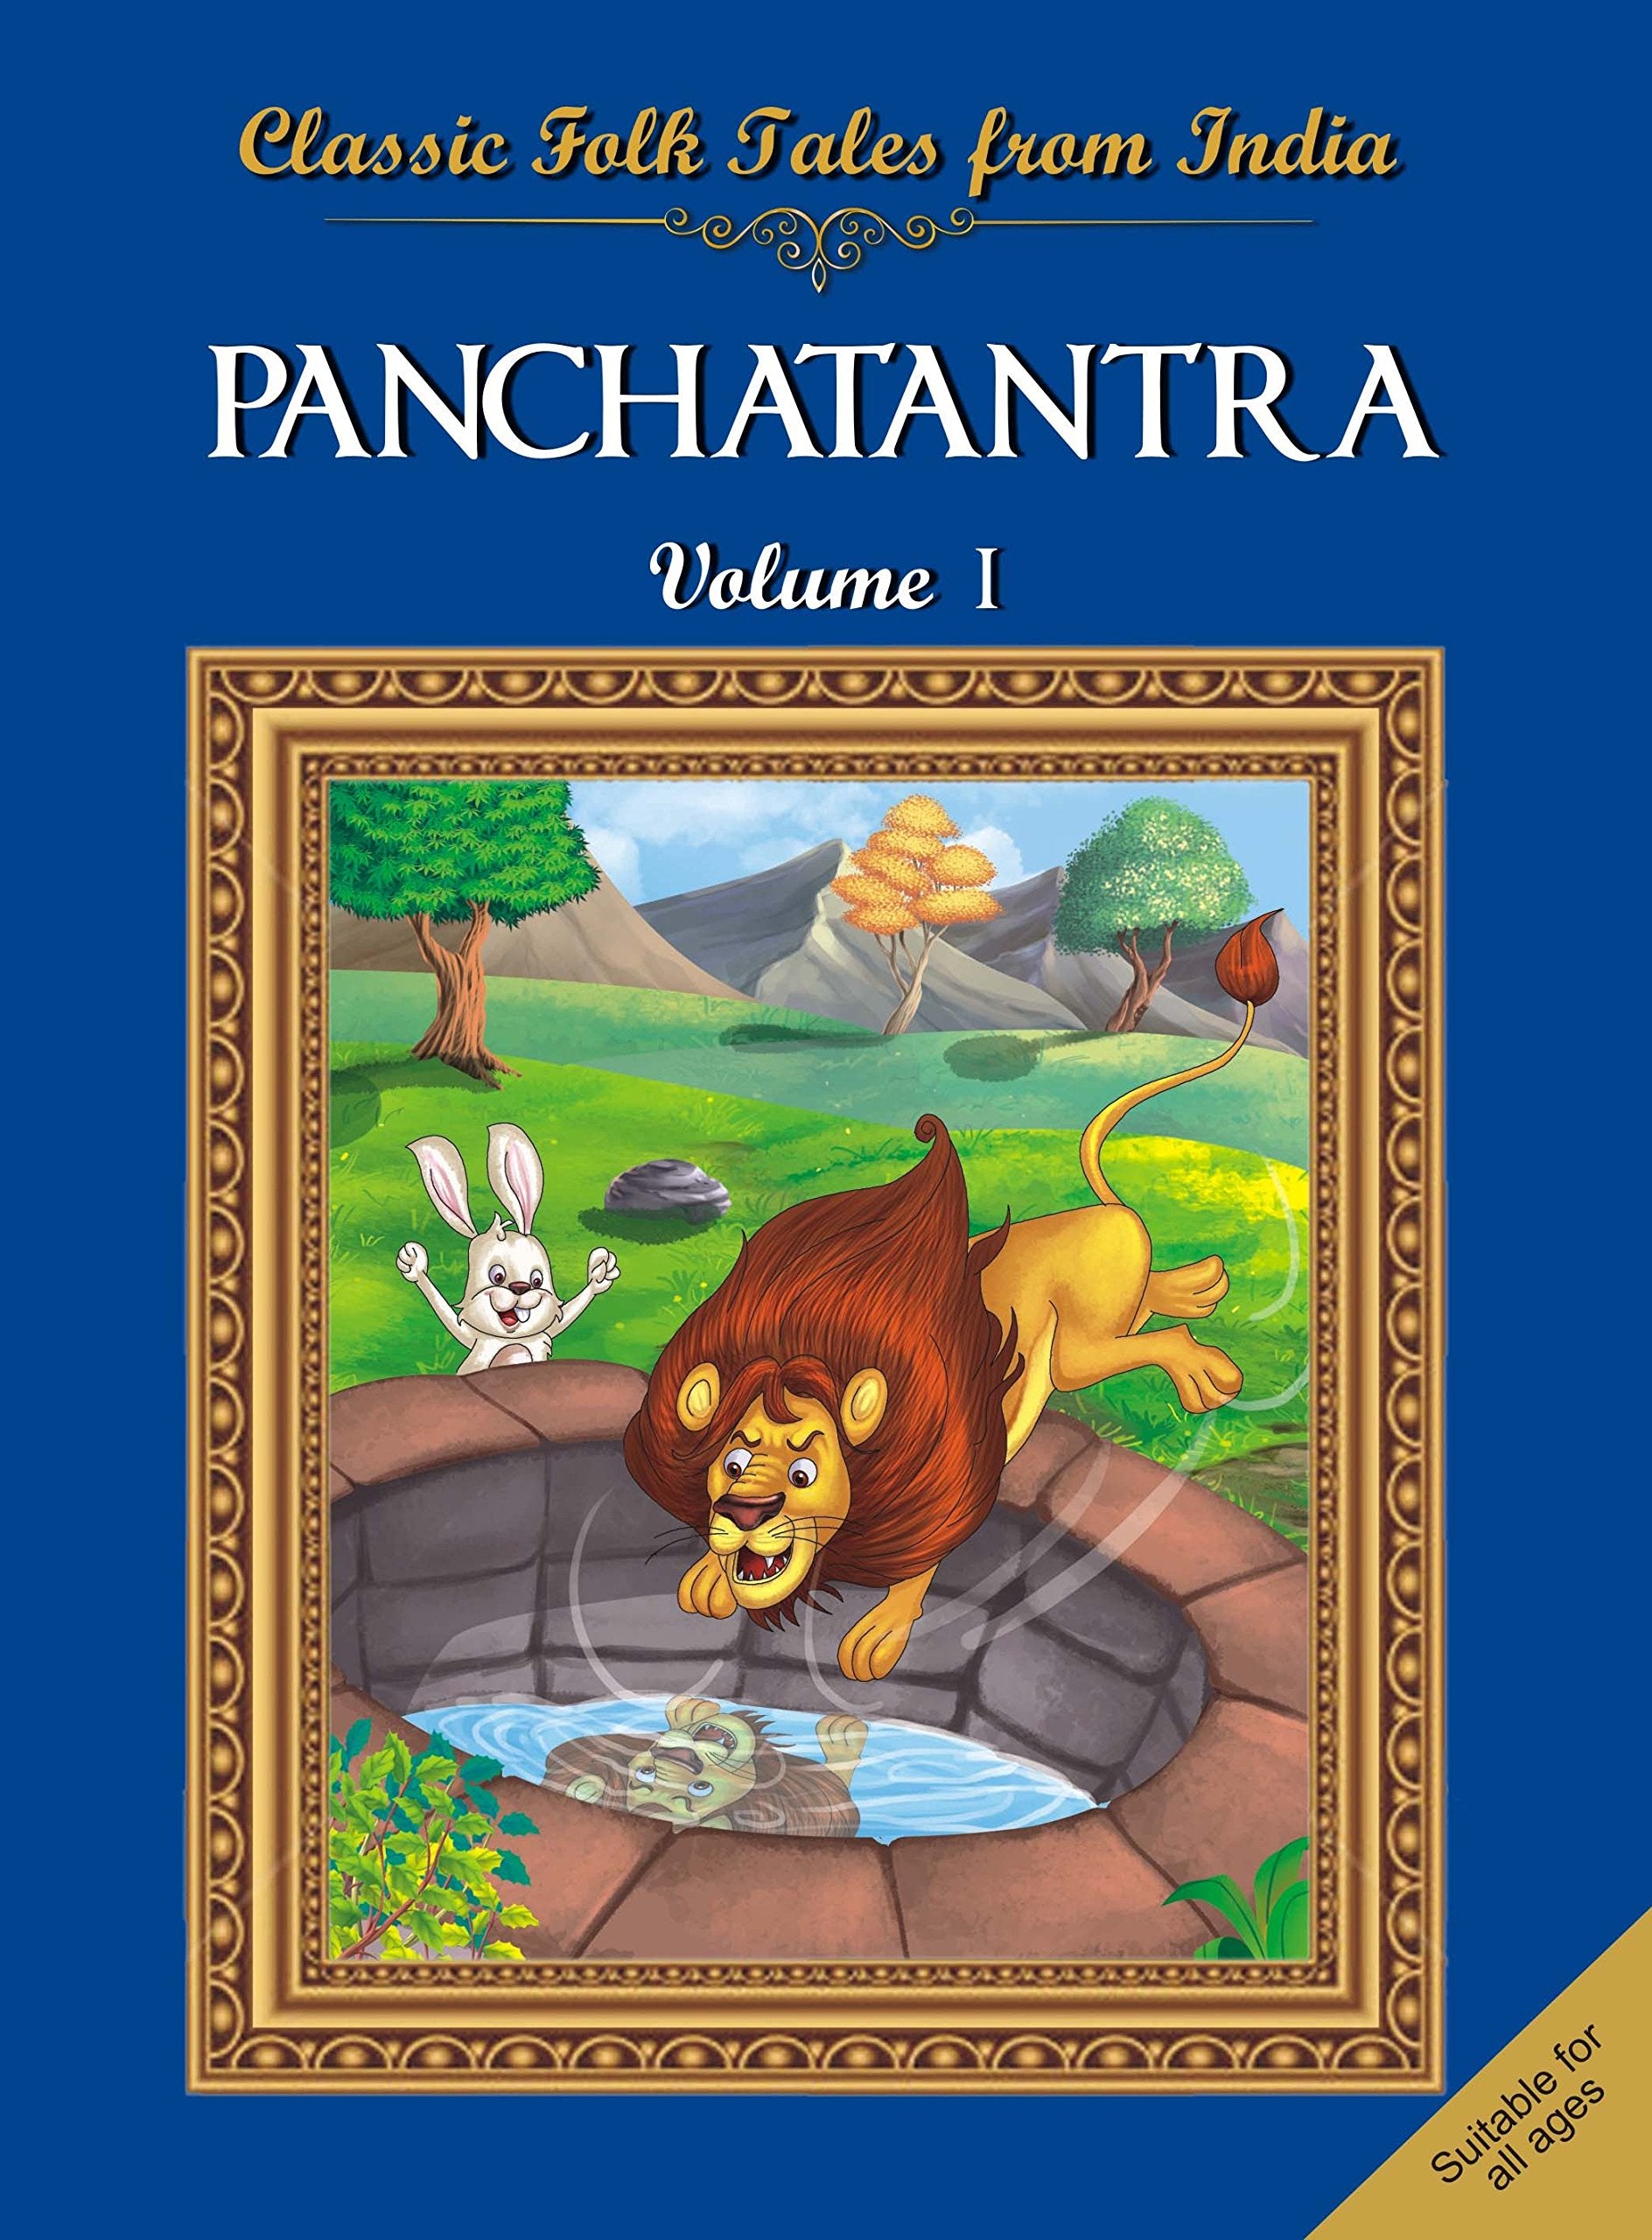 Classic Folk TalesFrom India :Panchatantra Vol I